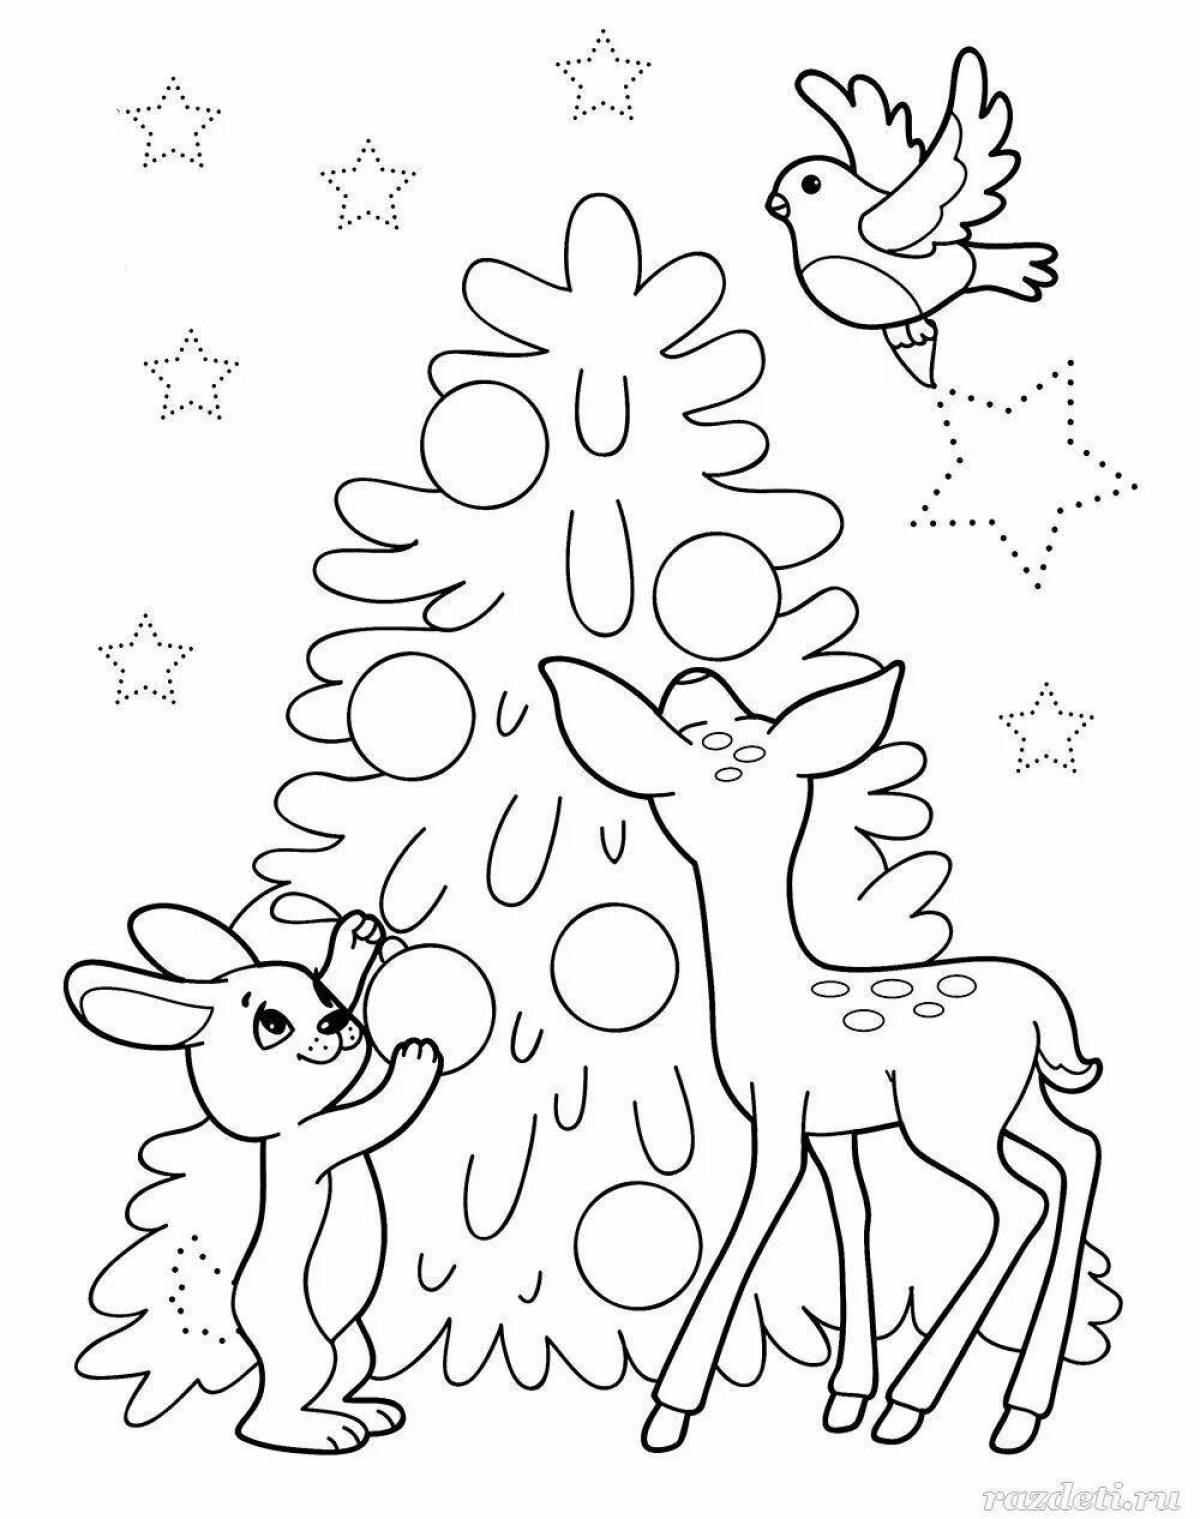 Great forest grew a Christmas tree coloring book